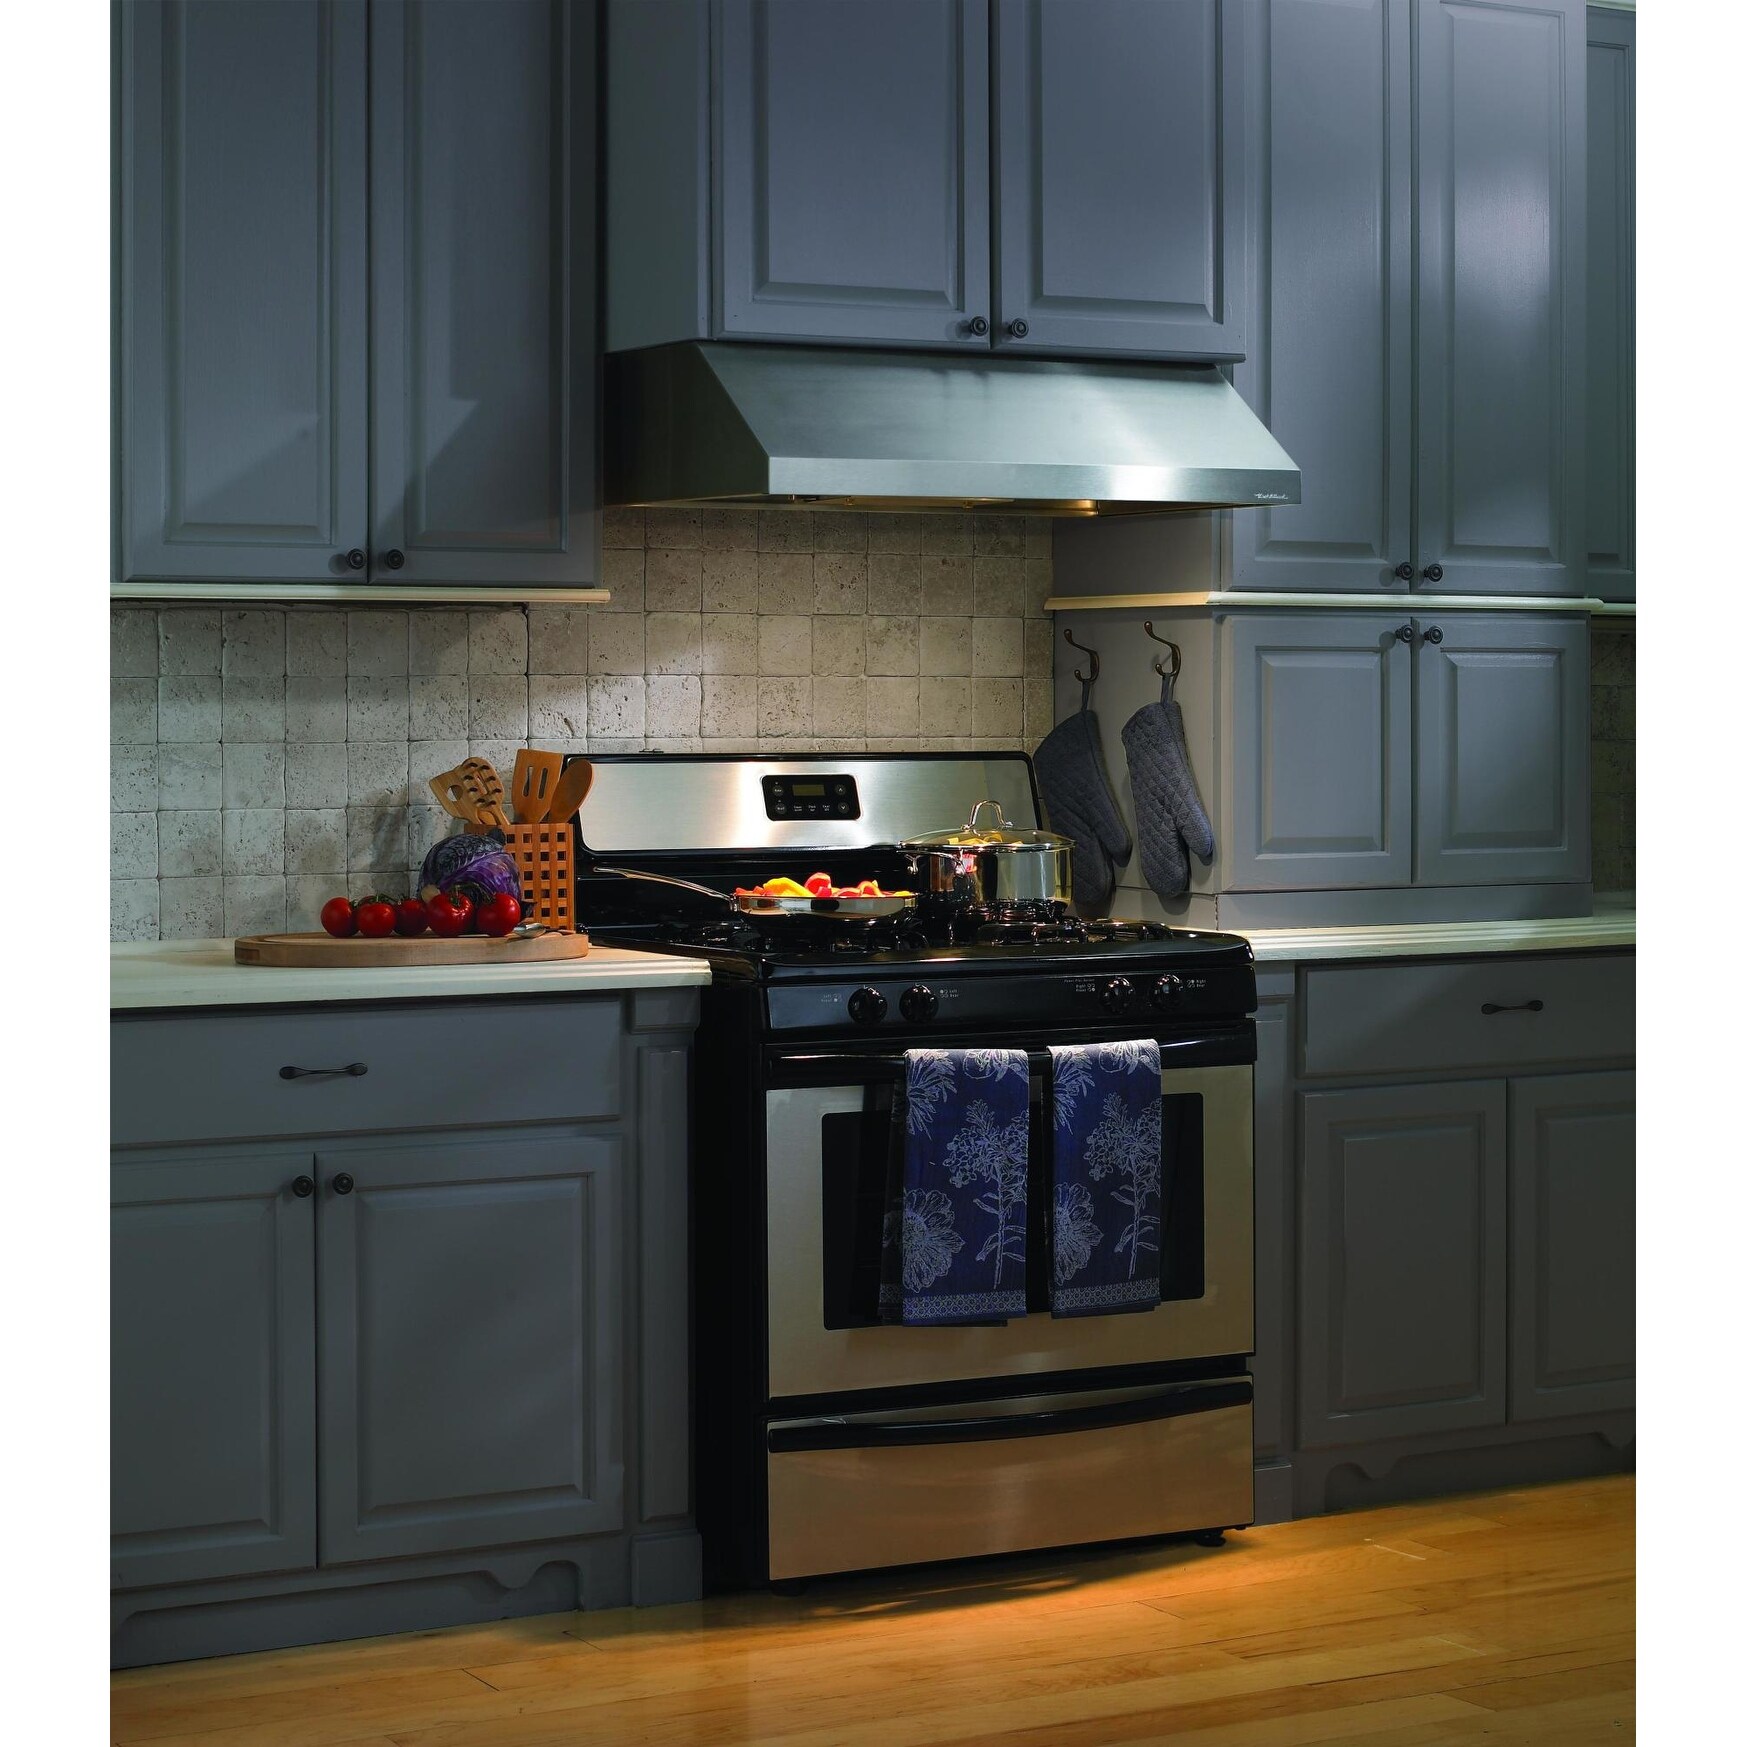 Vent-A-Hood PRH9-242 600 CFM 42 Under Cabinet Range Hood with Dual -  Stainless Steel - Bed Bath & Beyond - 17141884